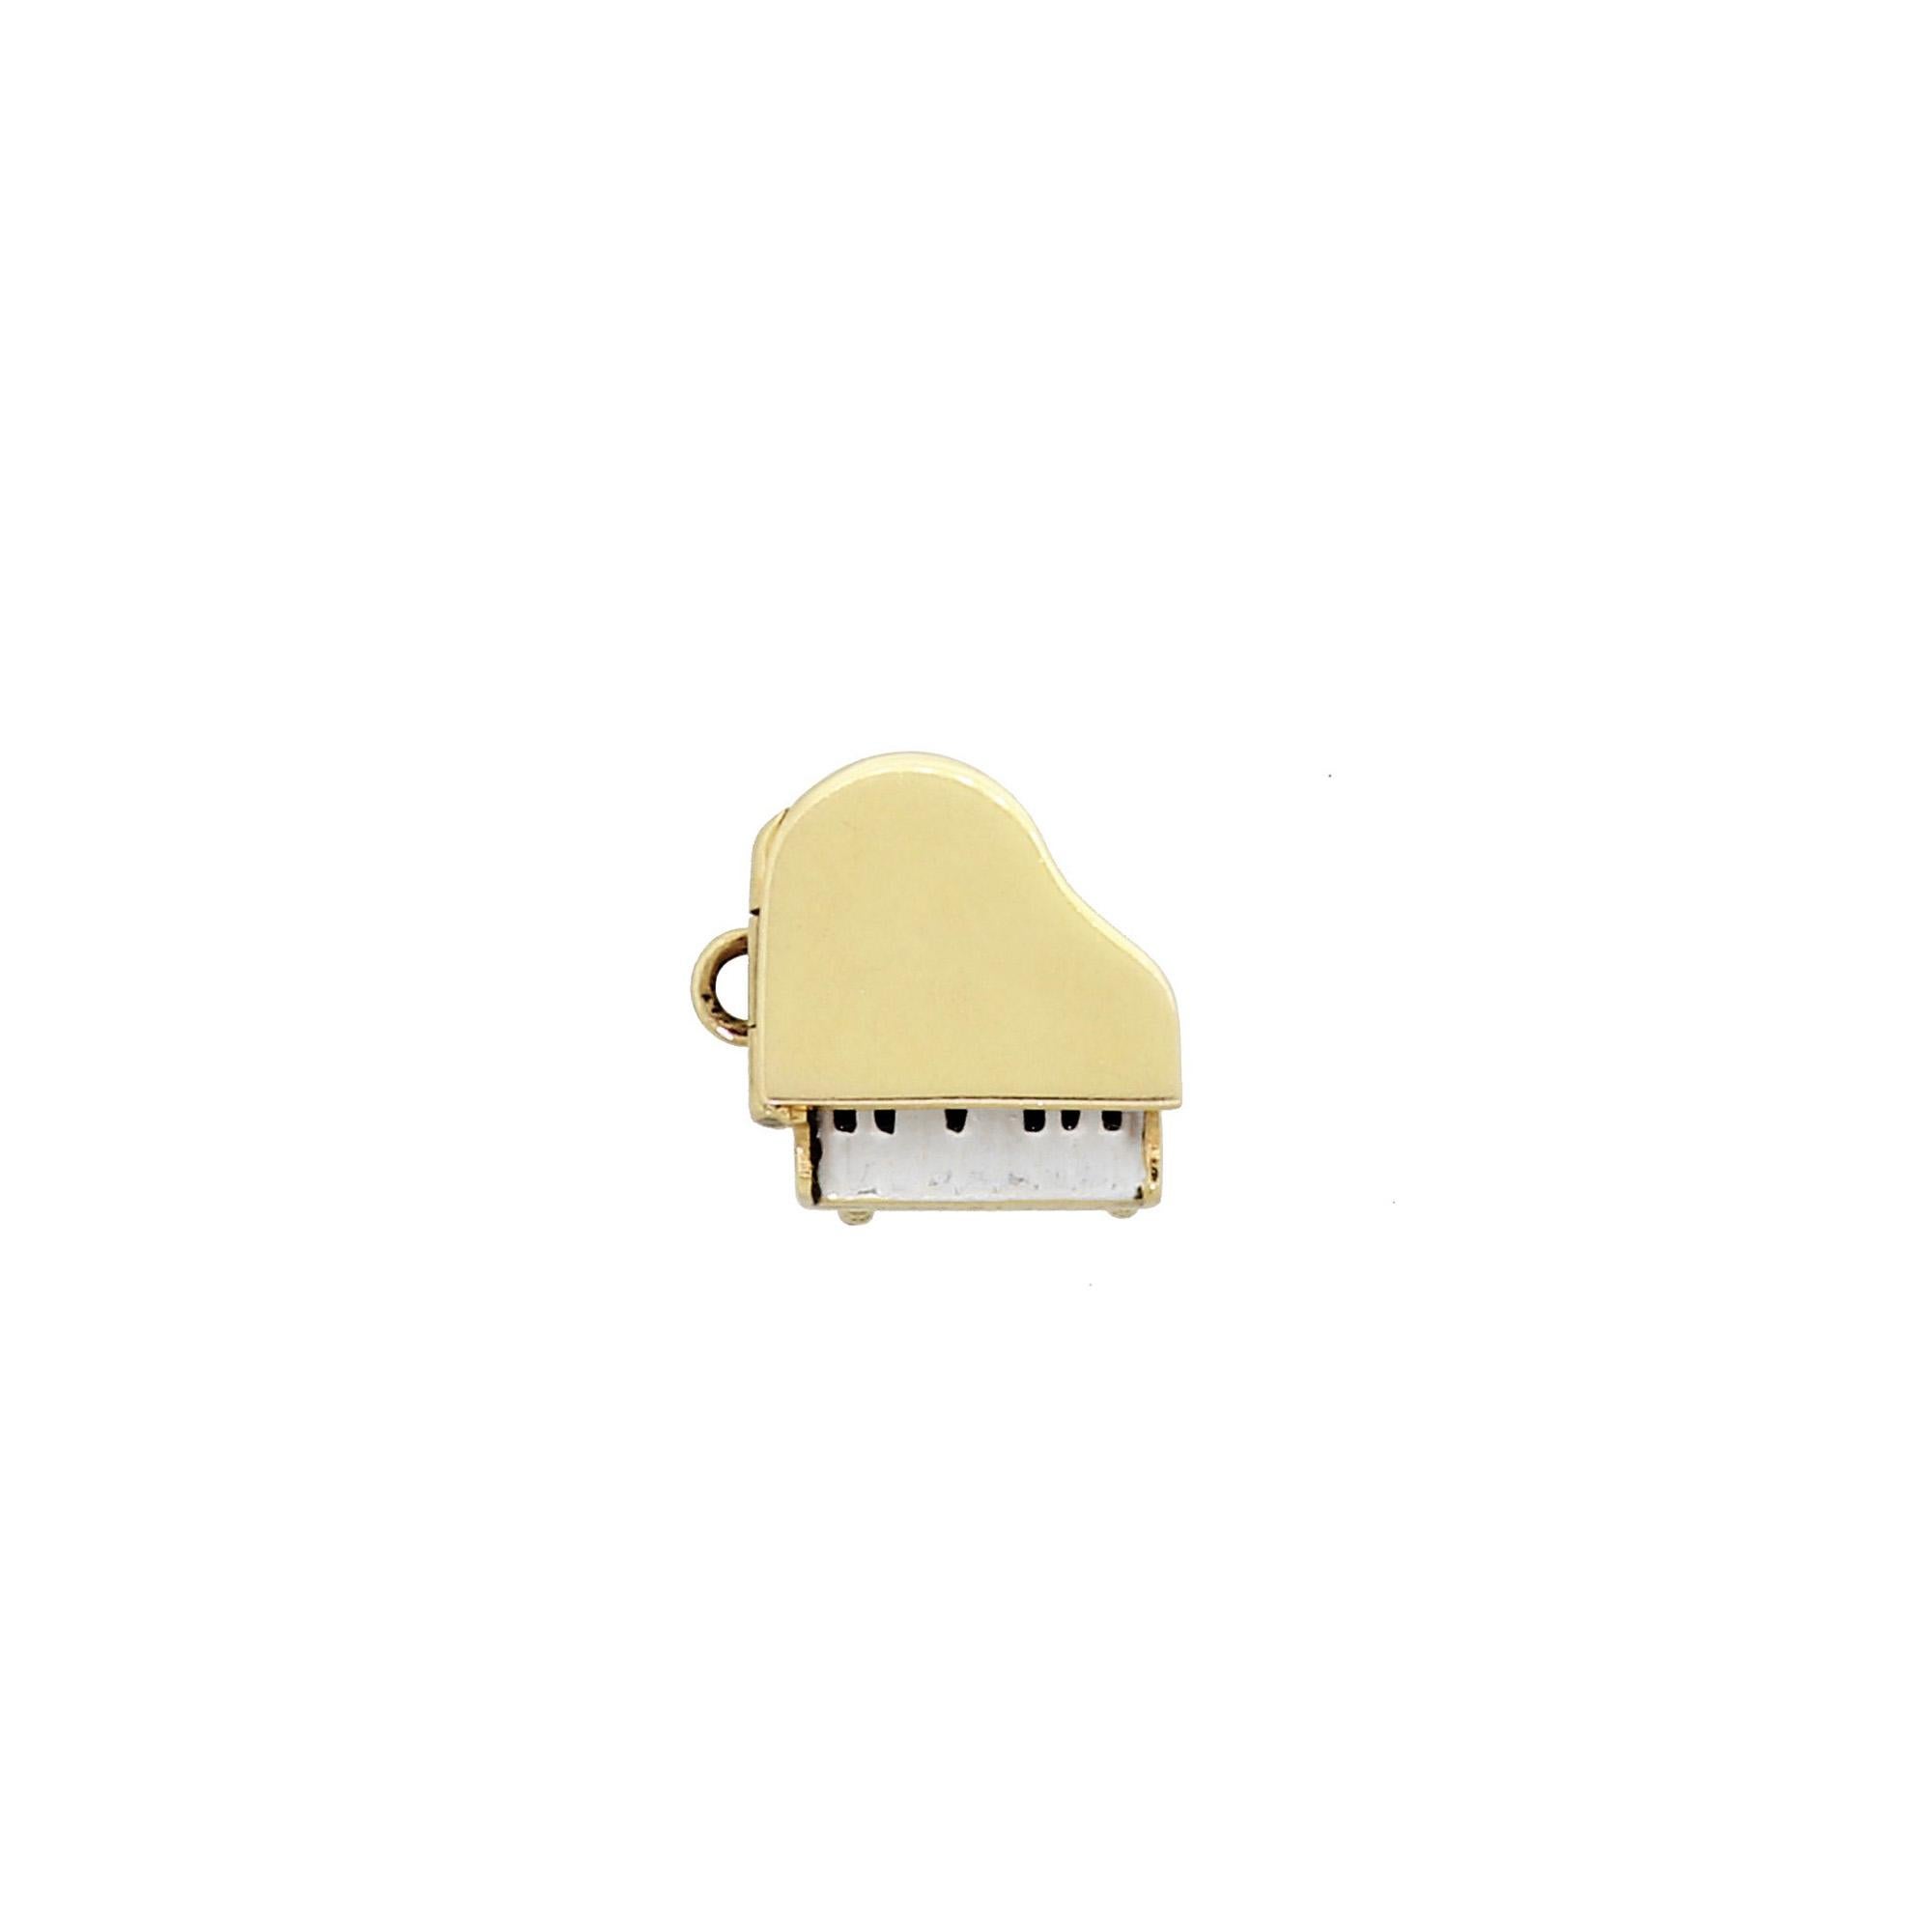 Modern 14K Yellow Gold & Enamel Baby Grand Piano Vintage Articulated Charm For Bracelet